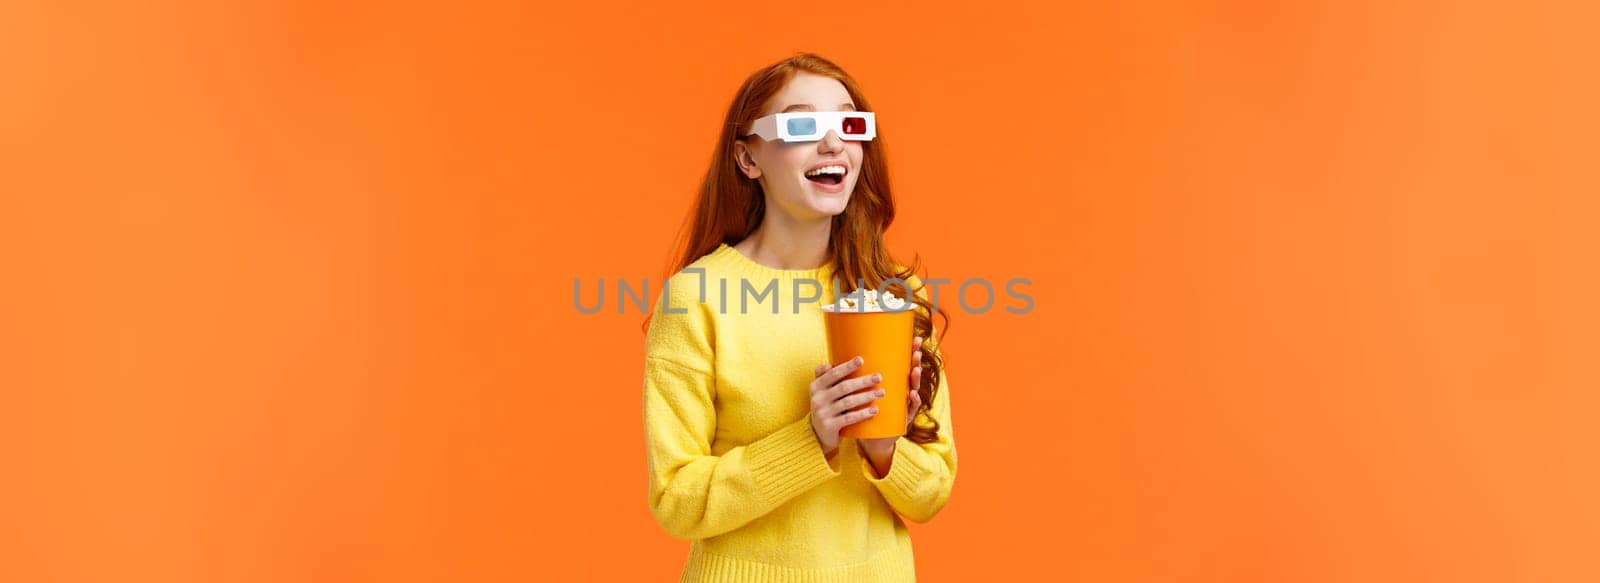 Girl eating popcorn, smiling amused as staring at large screen watching movie at cinema, open mouth thrilled, wear 3d glasses on fantasy film theatre, standing orange background.